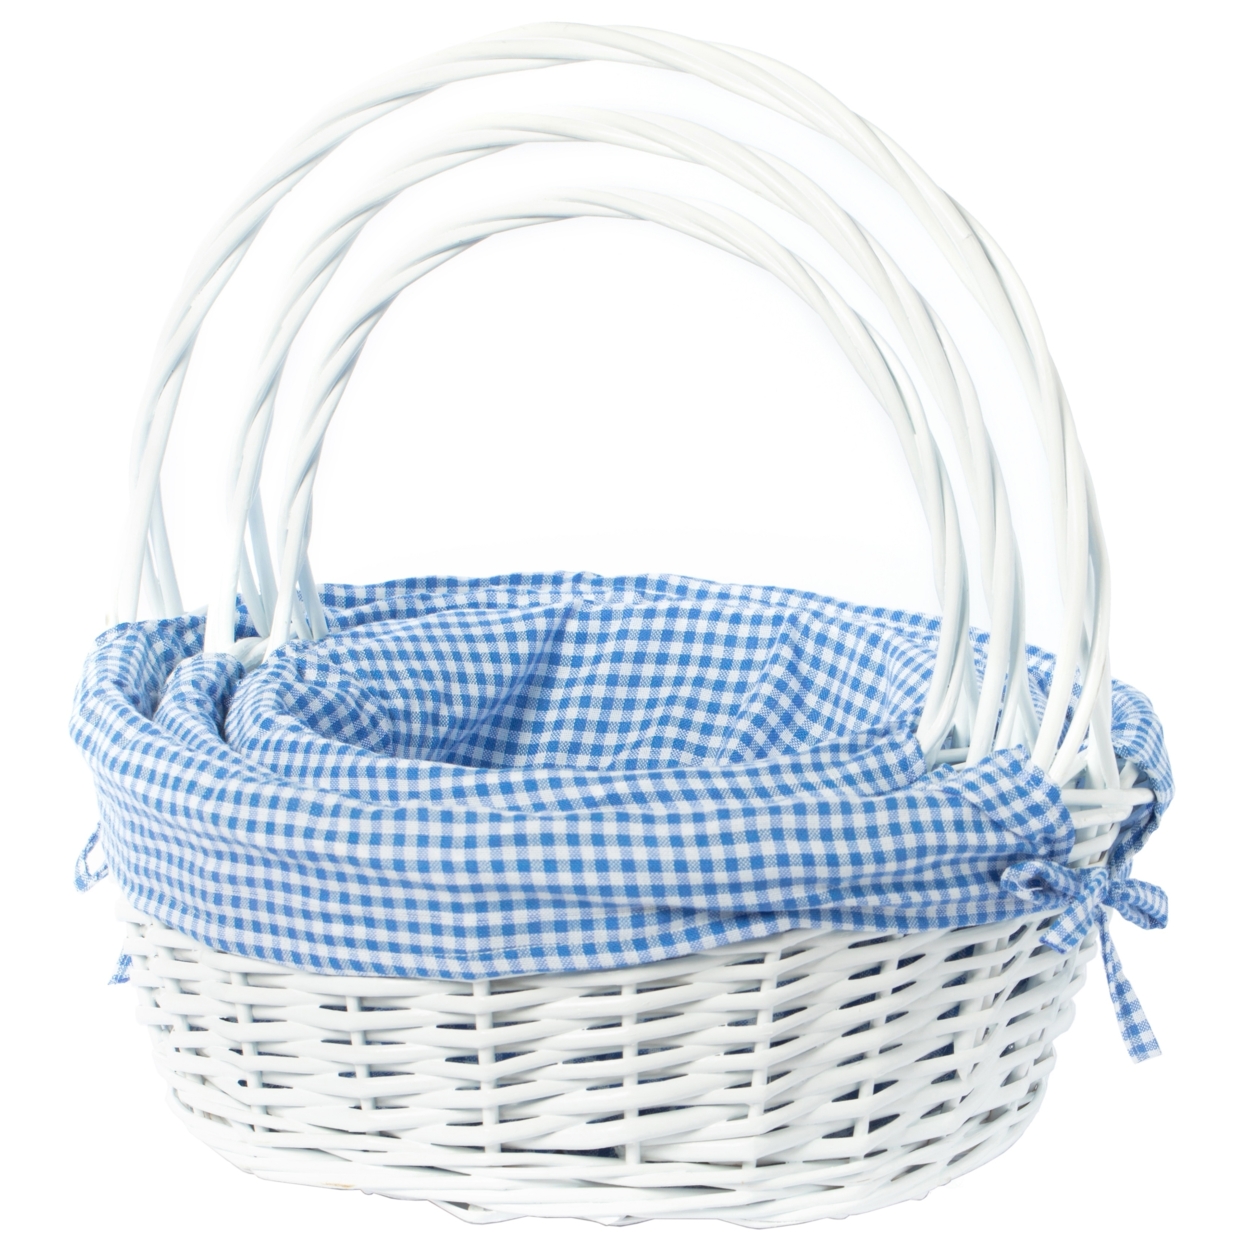 White Round Willow Gift Basket, With Blue And White Gingham Liner And Handles - Blue Set Of 3